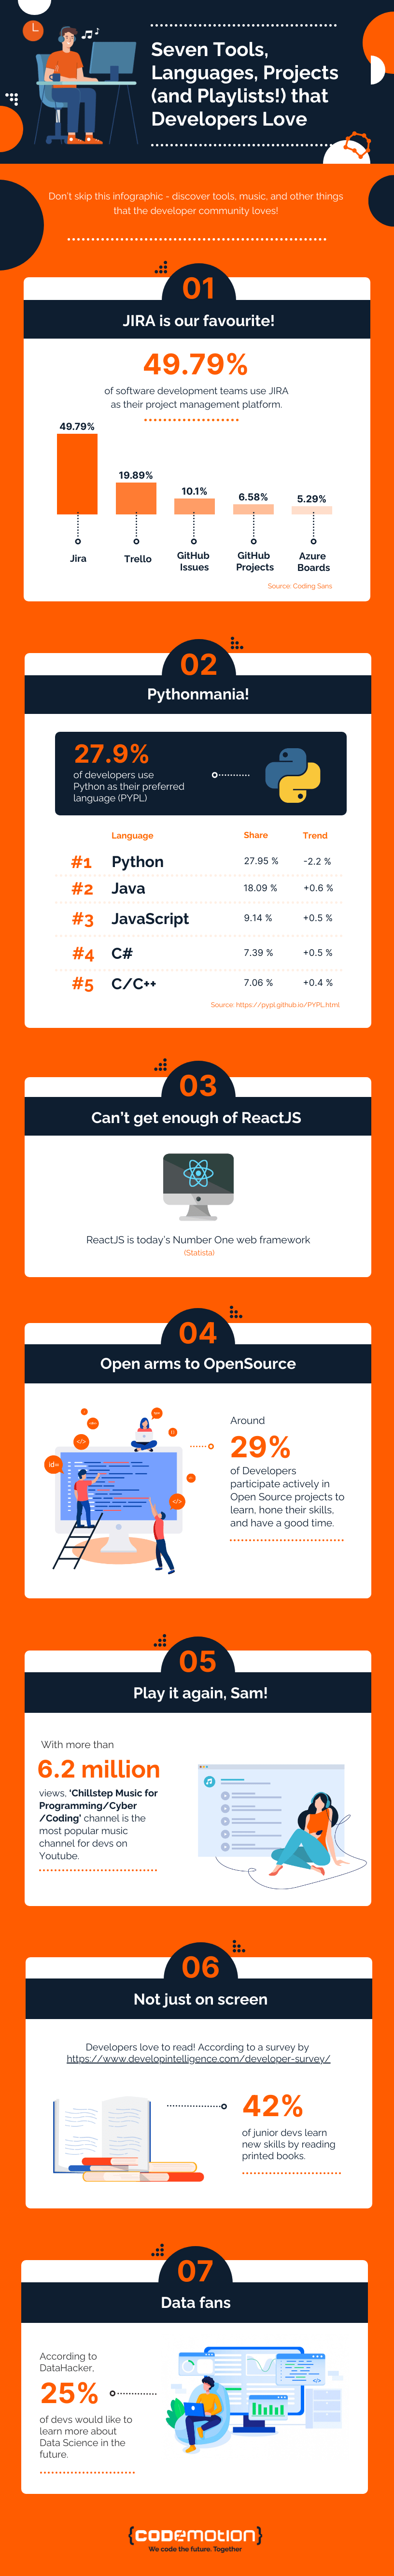 infographic, codemotion, tools for developers, things that devs love, music, playlists, languages